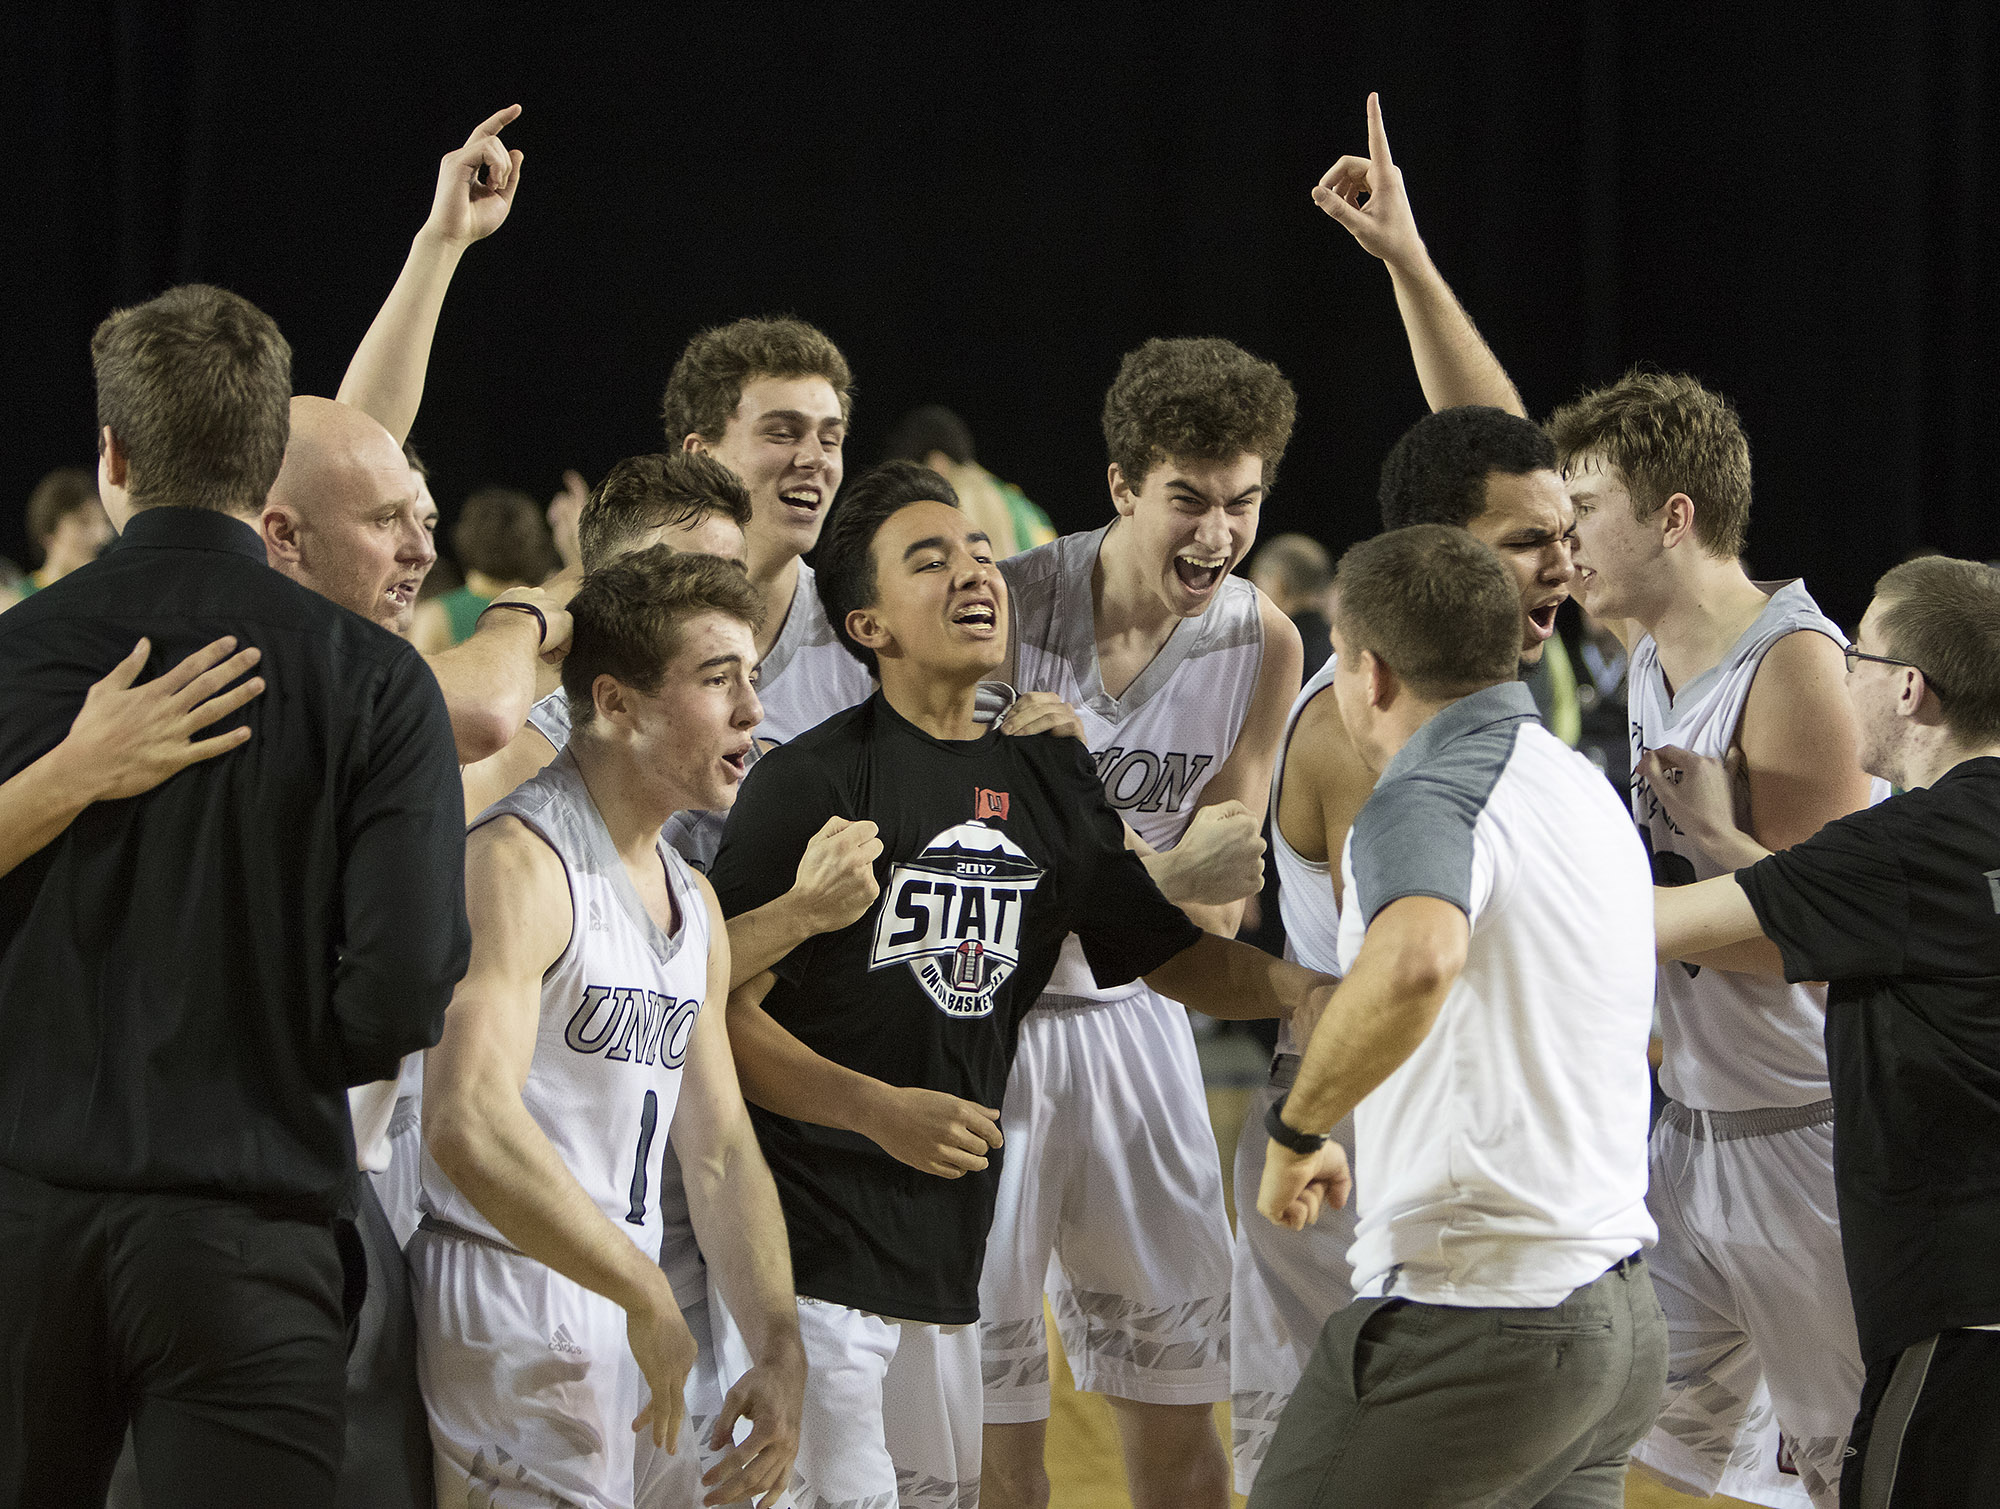 Union's players and coaches react after defeating Richland Friday, March 3, 2017, during the semifinals of the 4A Boys State Basketball Tournament in Tacoma, Wash. Union bested Richland 63-61 to advance to the championship game.